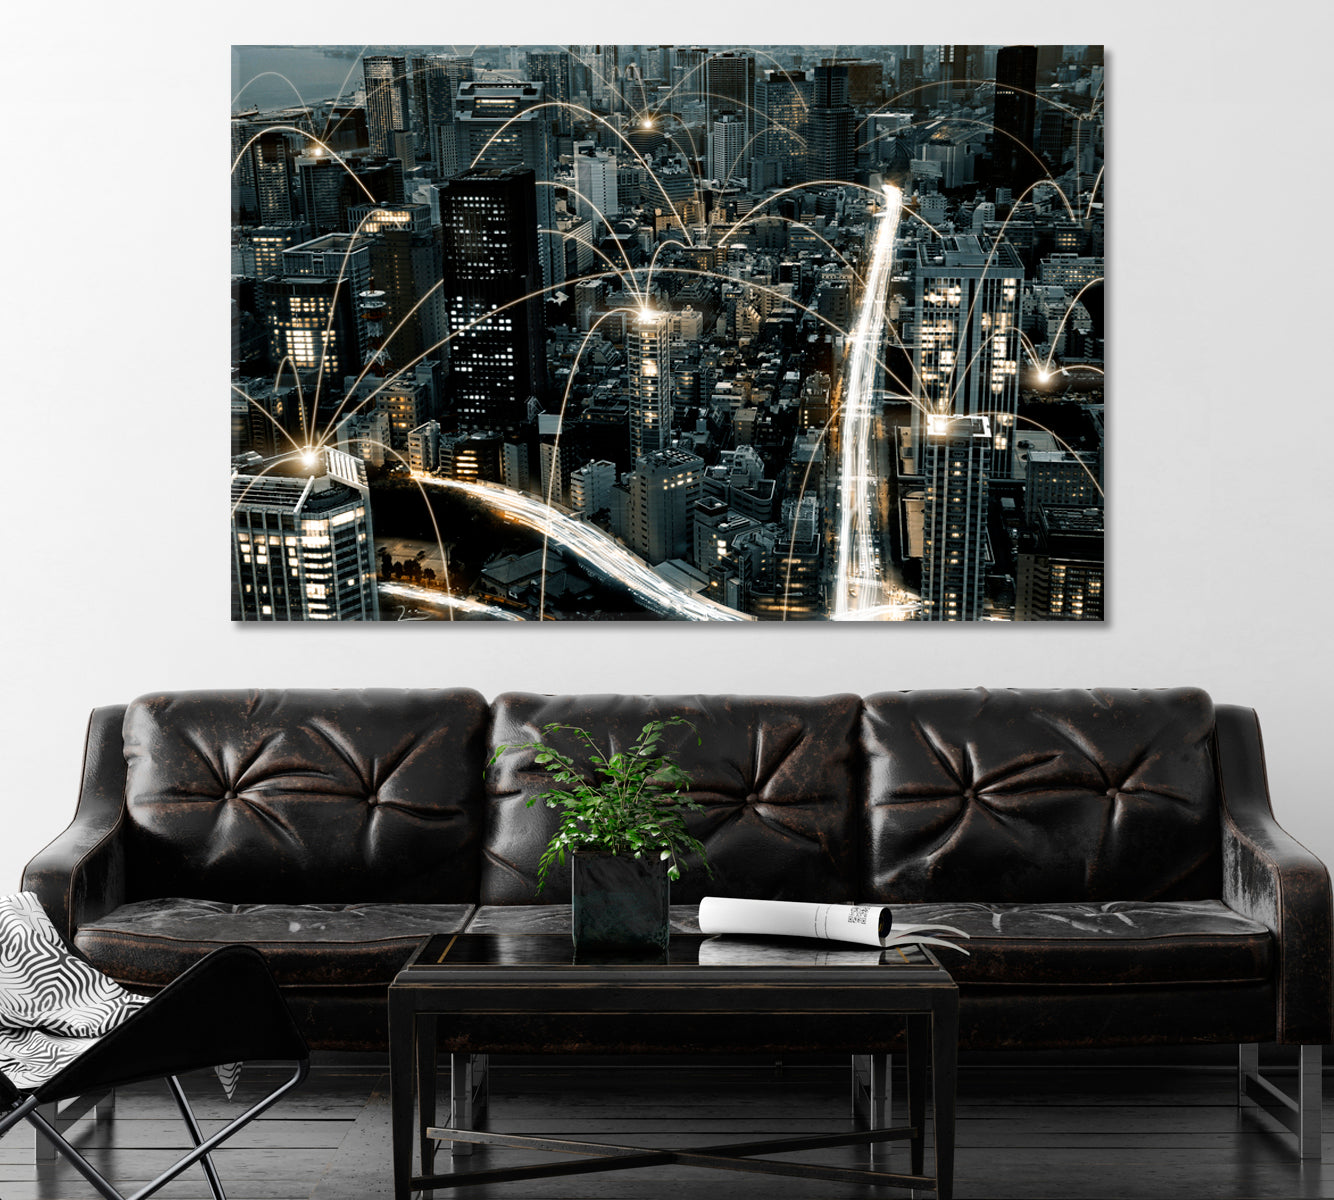 City Network Canvas Print ArtLexy 1 Panel 24"x16" inches 